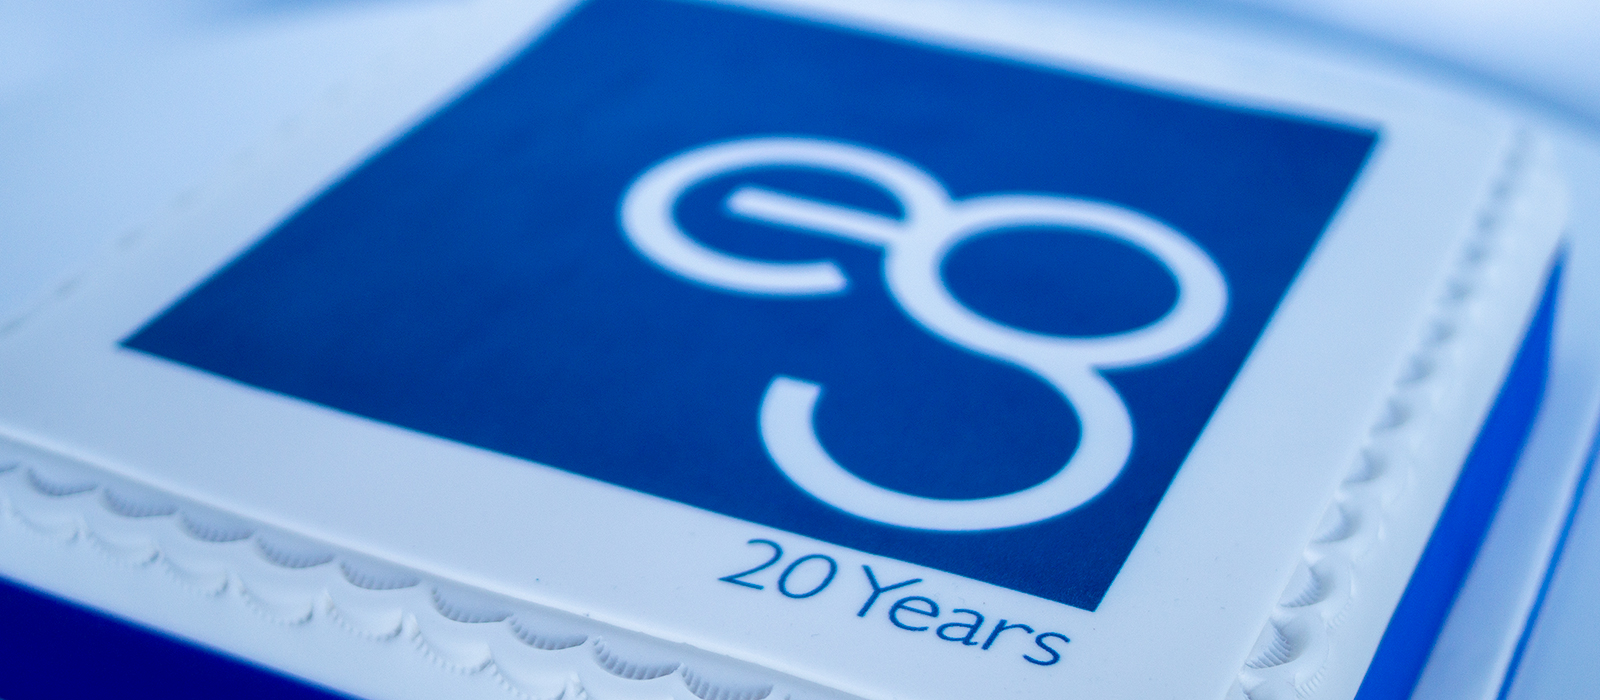 eg technology celebrate our 20th anniversary